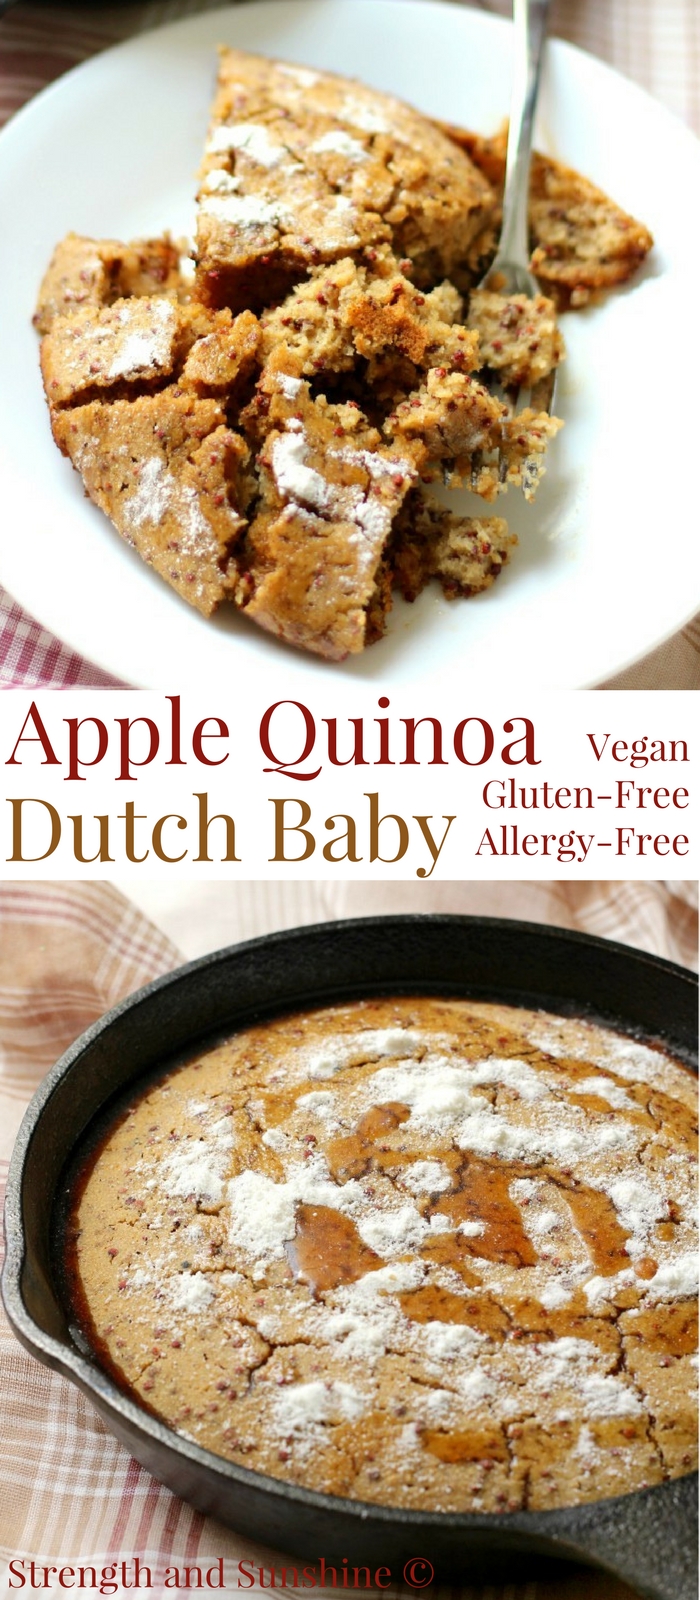 Gluten-Free Apple Quinoa Dutch Baby Pancake (Vegan, Allergy-Free) | Strength and Sunshine @RebeccaGF666 Who would pass up a baked pancake? This Gluten-Free Apple Quinoa Dutch Baby is vegan and top-8 allergy-free. A traditional German breakfast recipe transformed for a delicious, healthy, and easy seasonal treat! #glutenfree #vegan #dutchbaby #quinoa #apple #breakfast